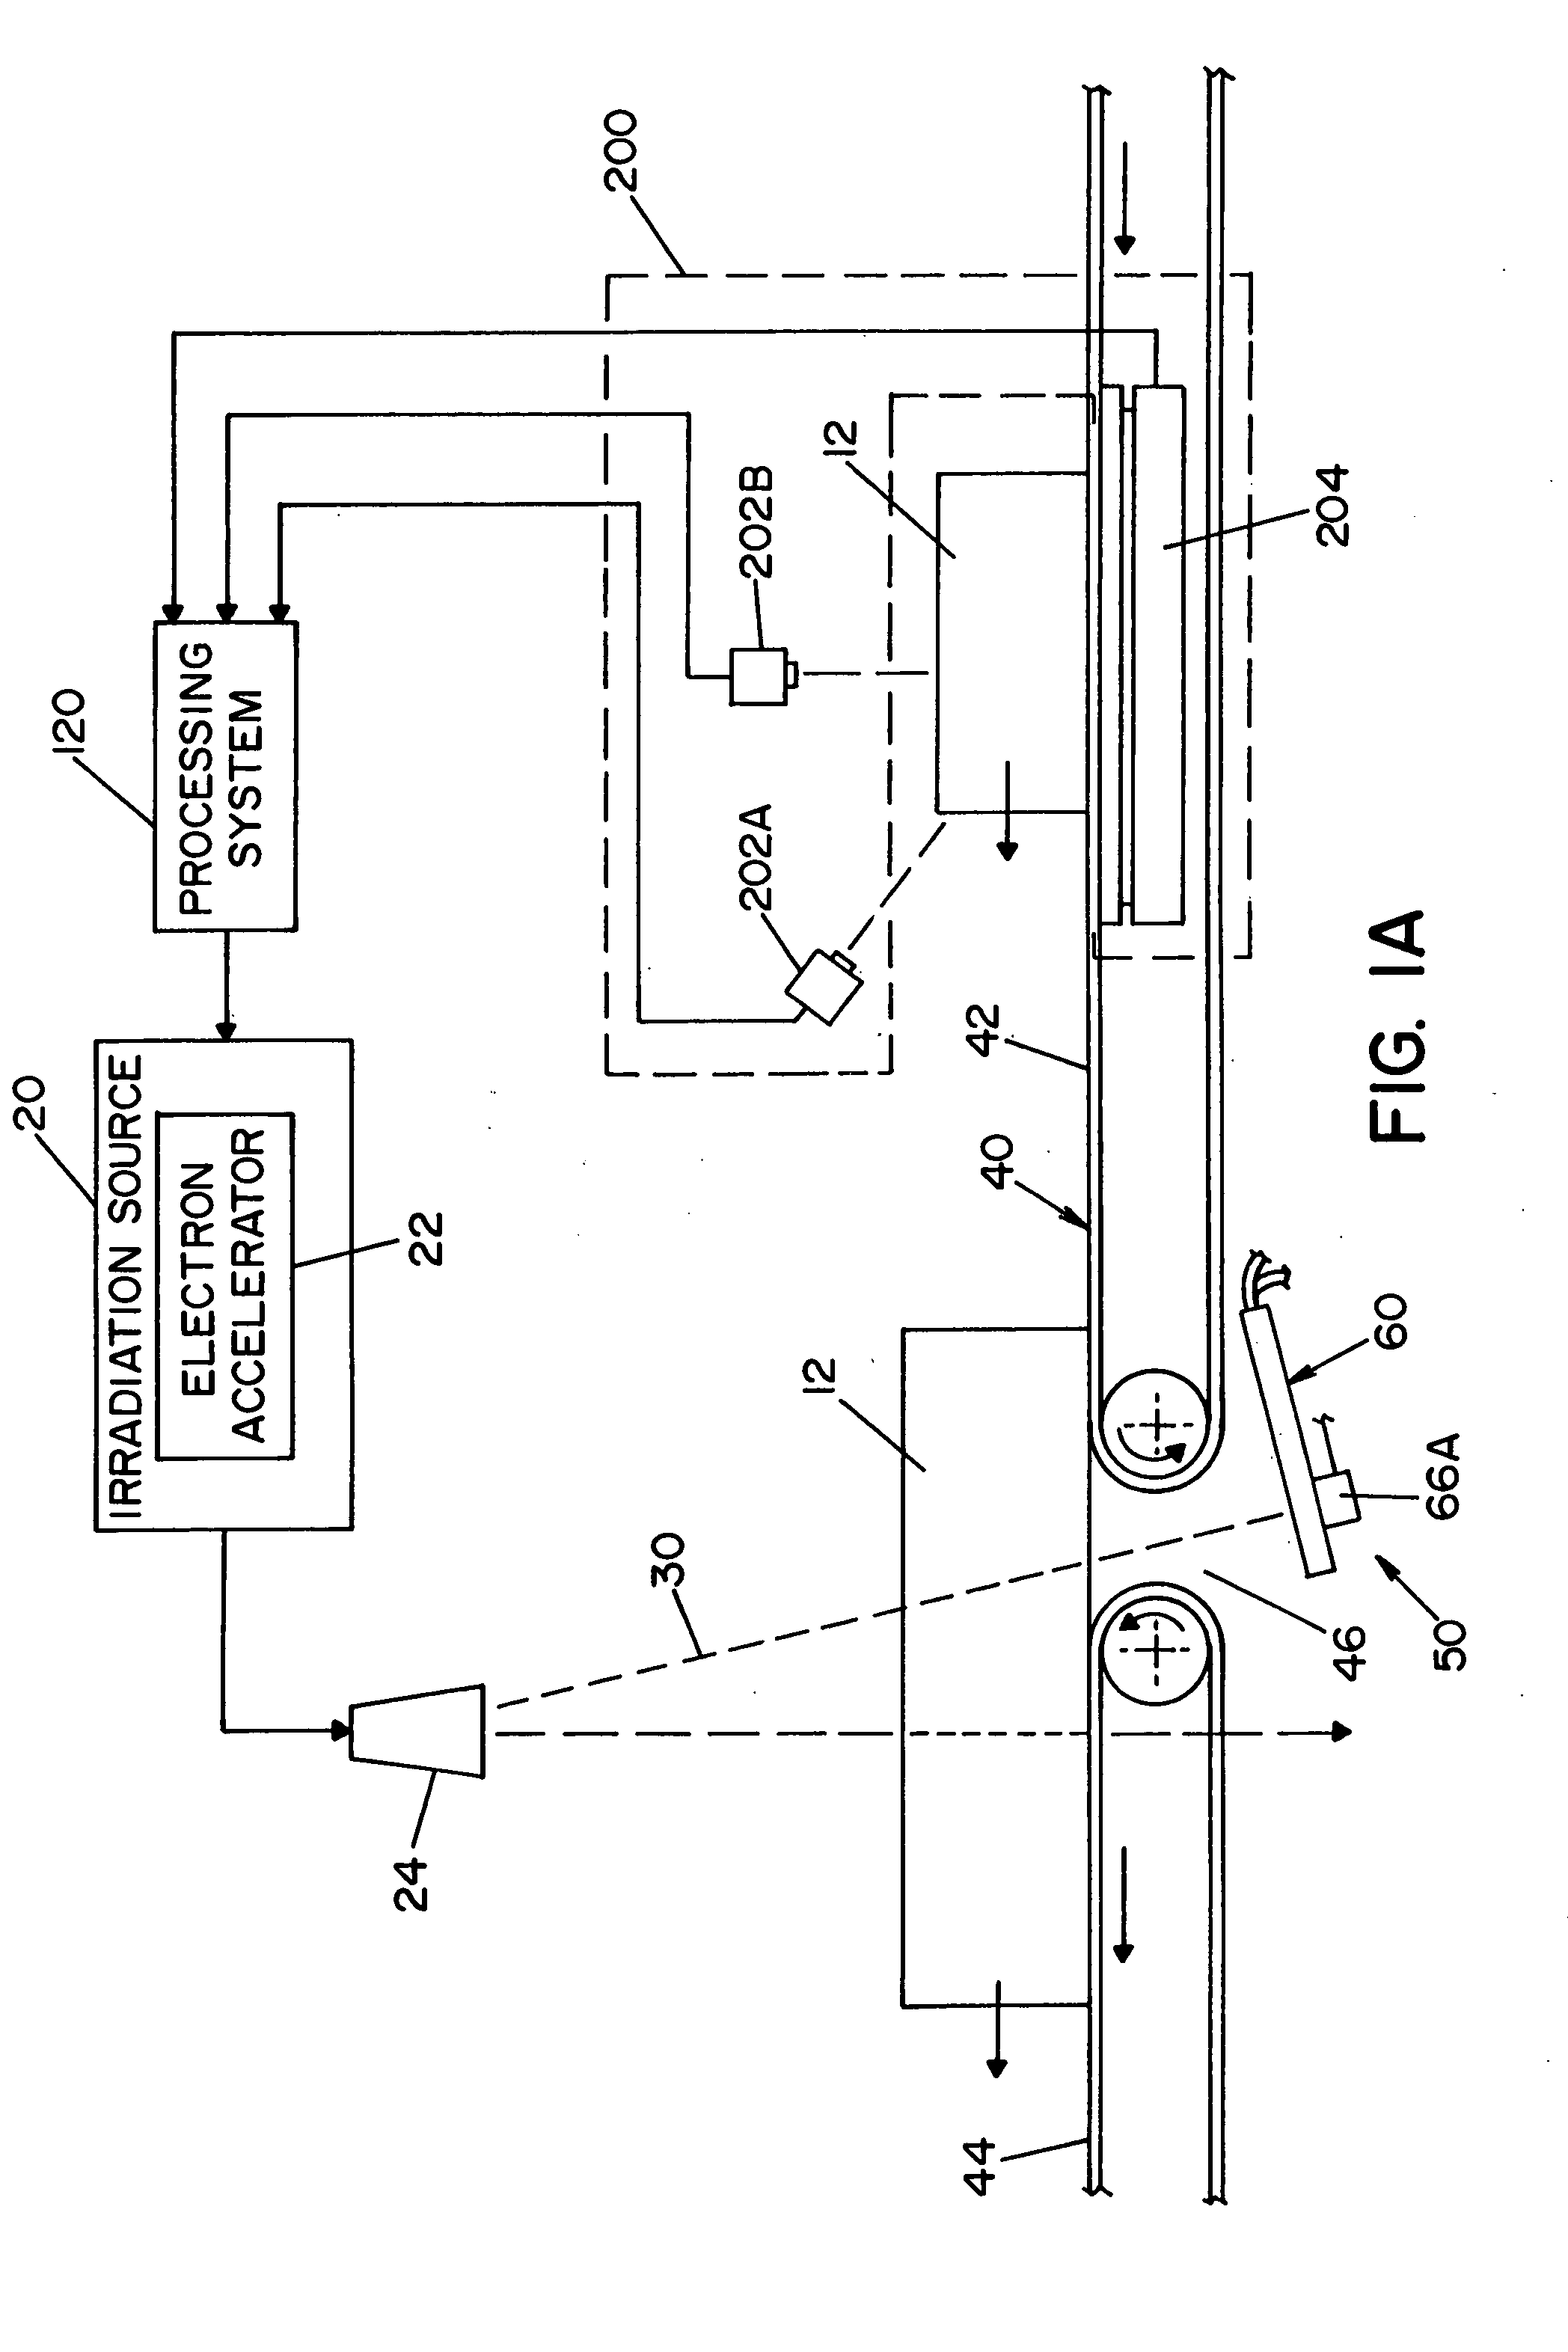 Irradiation system having cybernetic parameter acquisition system